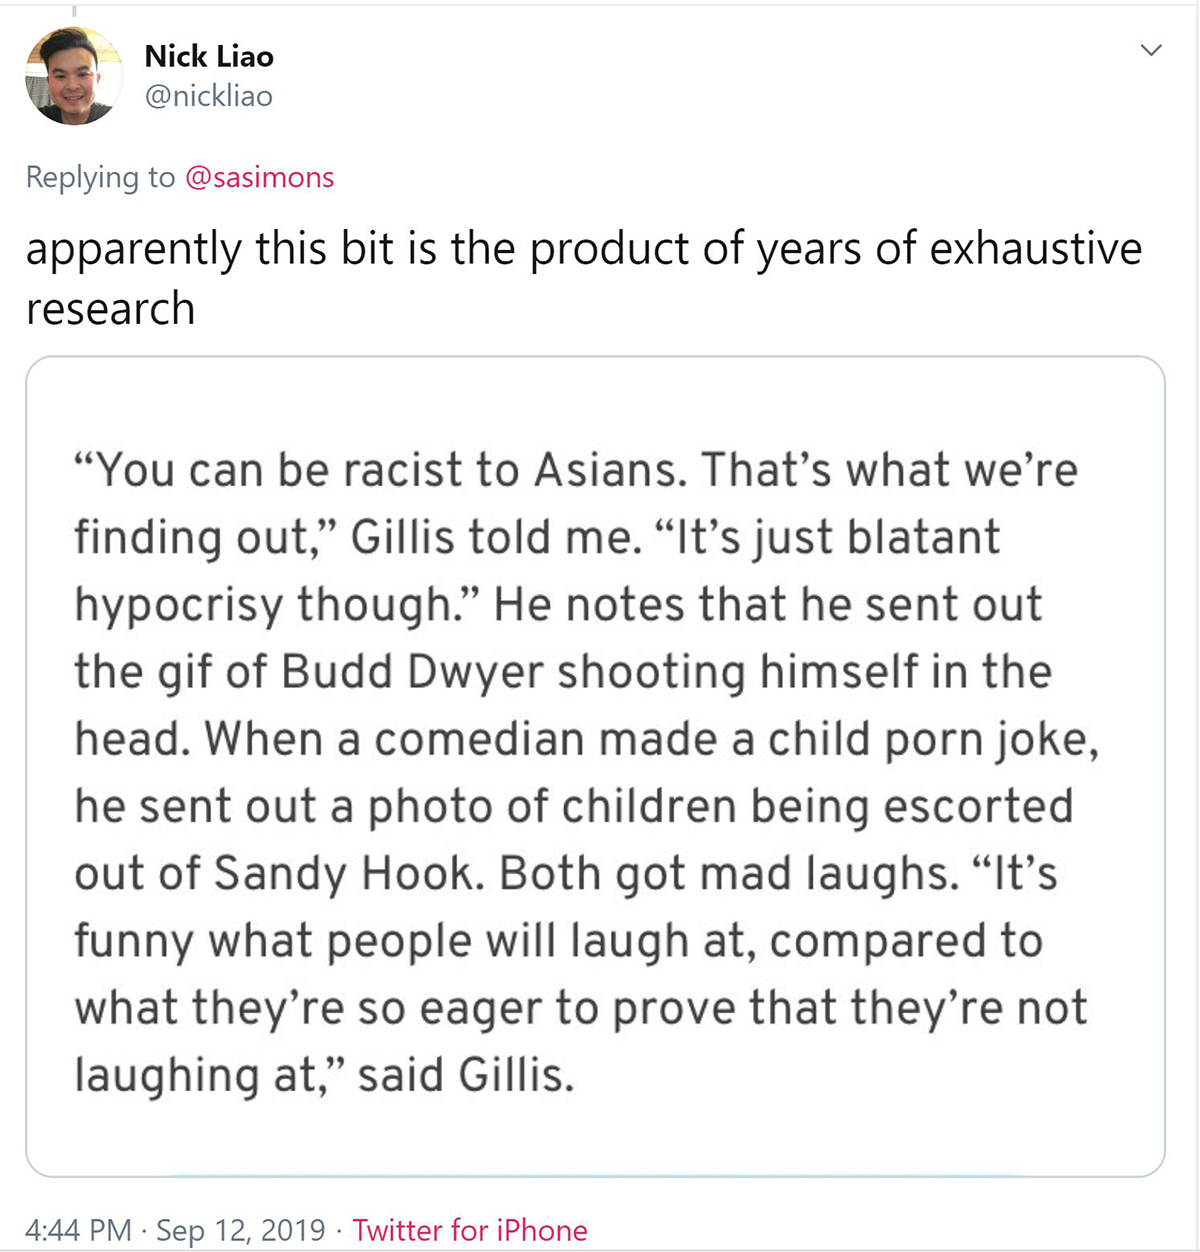 screenshot of a tweet of a screenshot of a quote from gillis in 2016, claiming it was funny to be racist to asians.